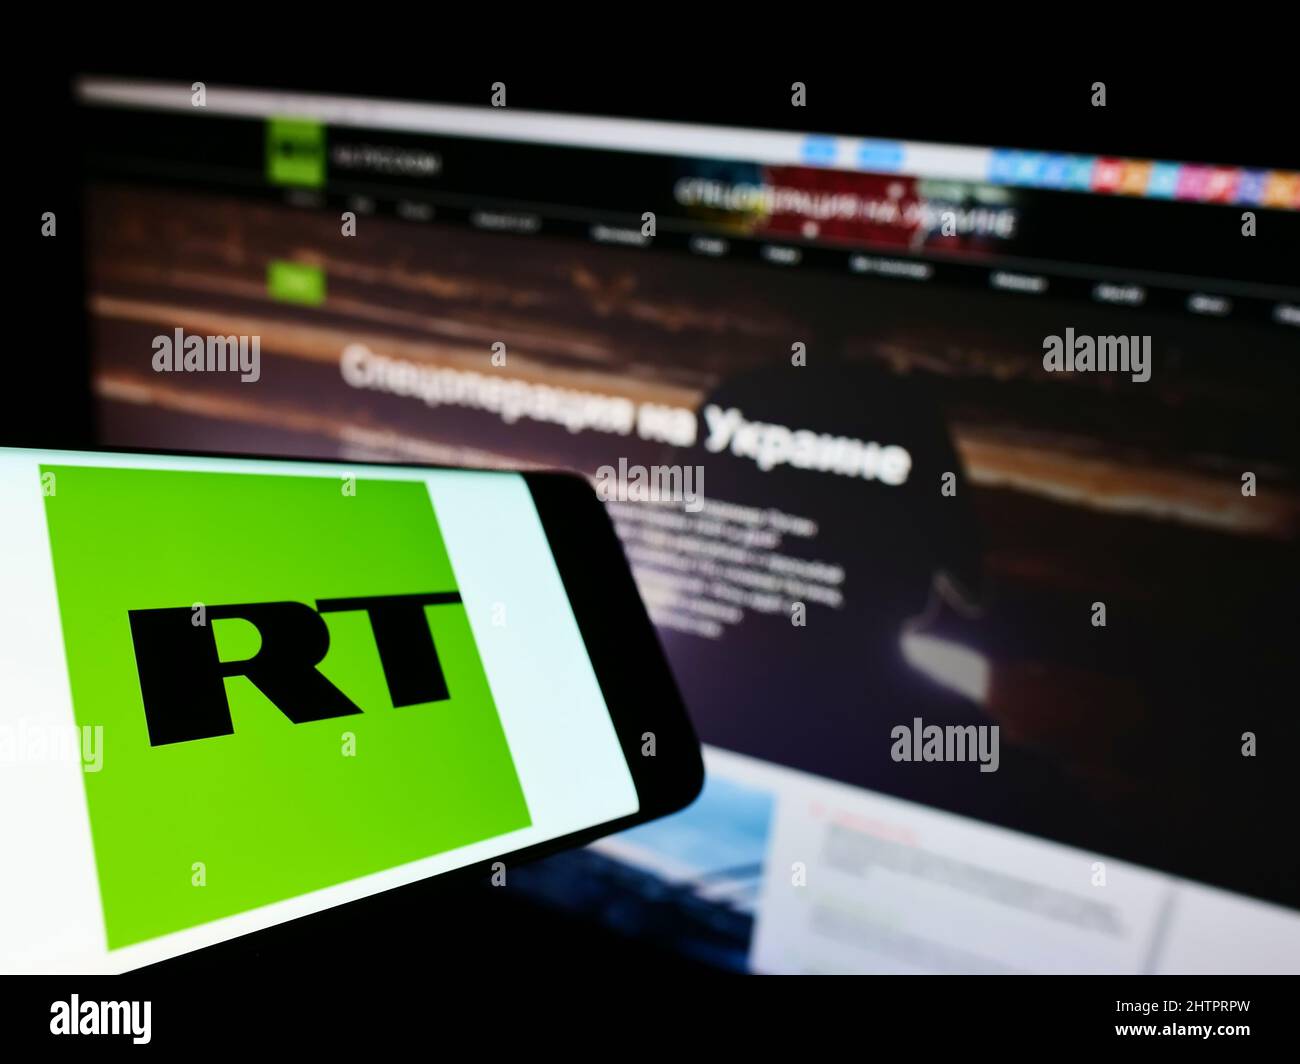 Mobile phone with logo of Russian state-controlled television company RT on screen in front of website. Focus on center-left of phone display. Stock Photo